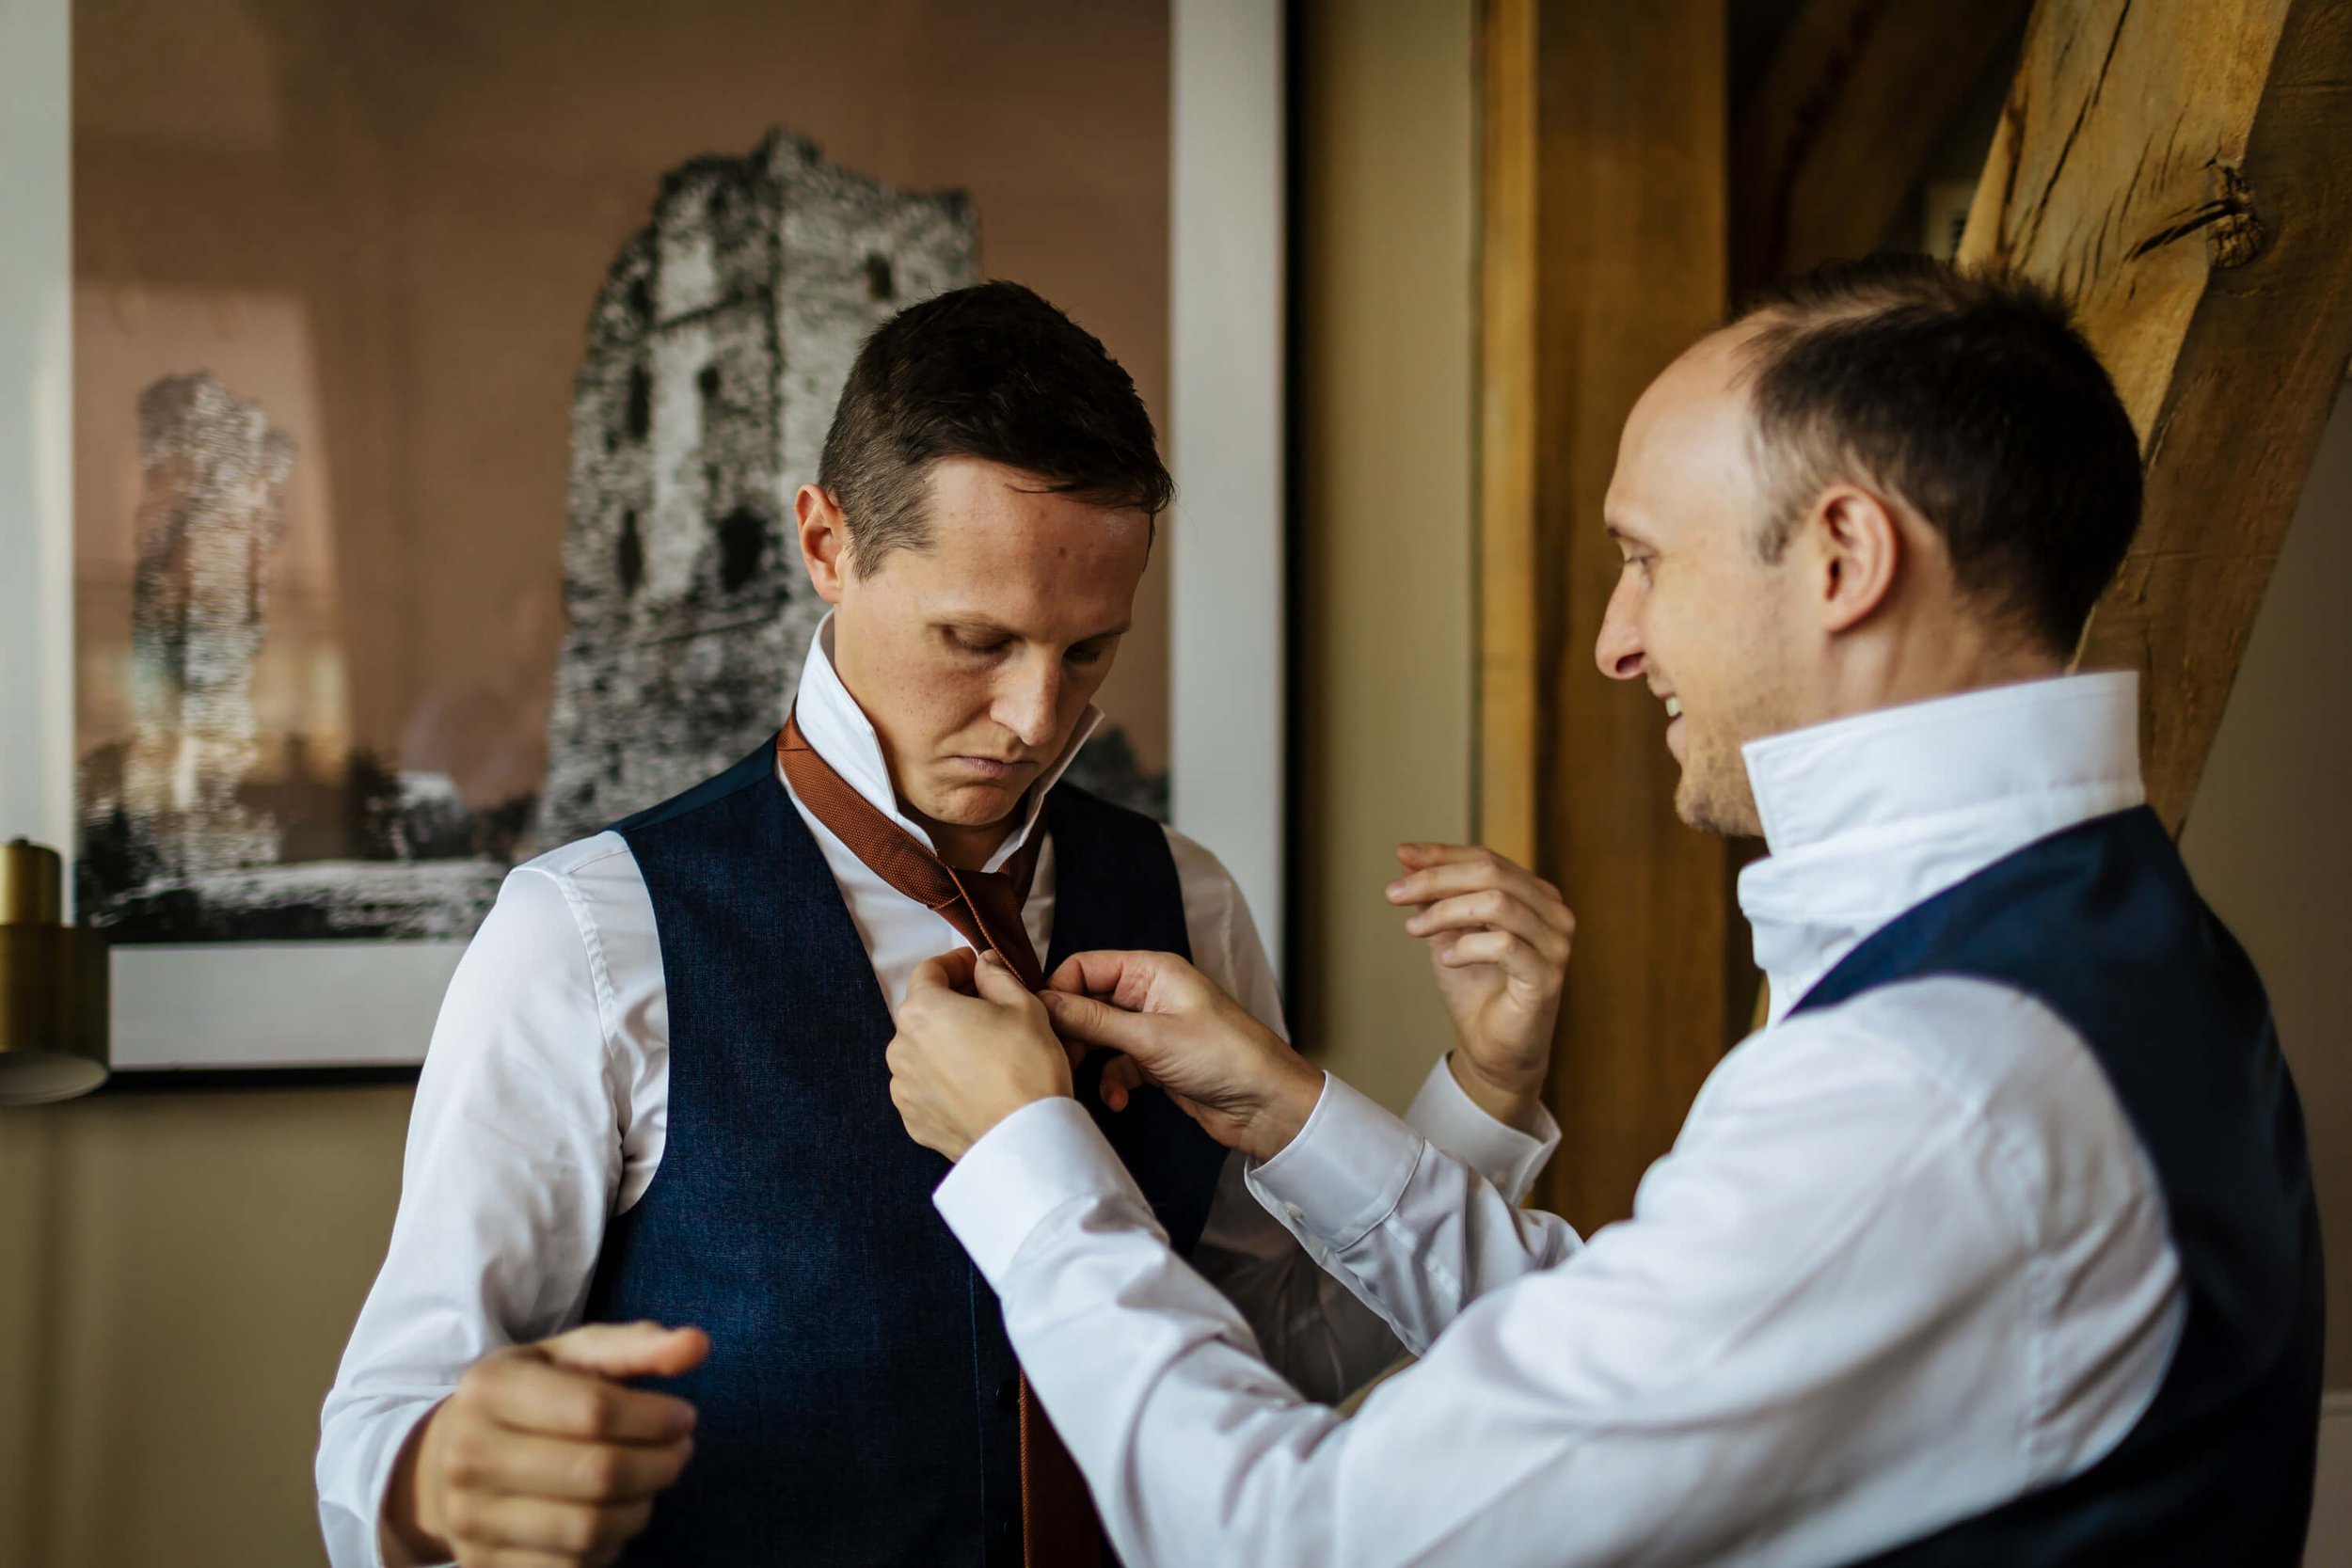 Groom having his tie put on for the wedding ceremony